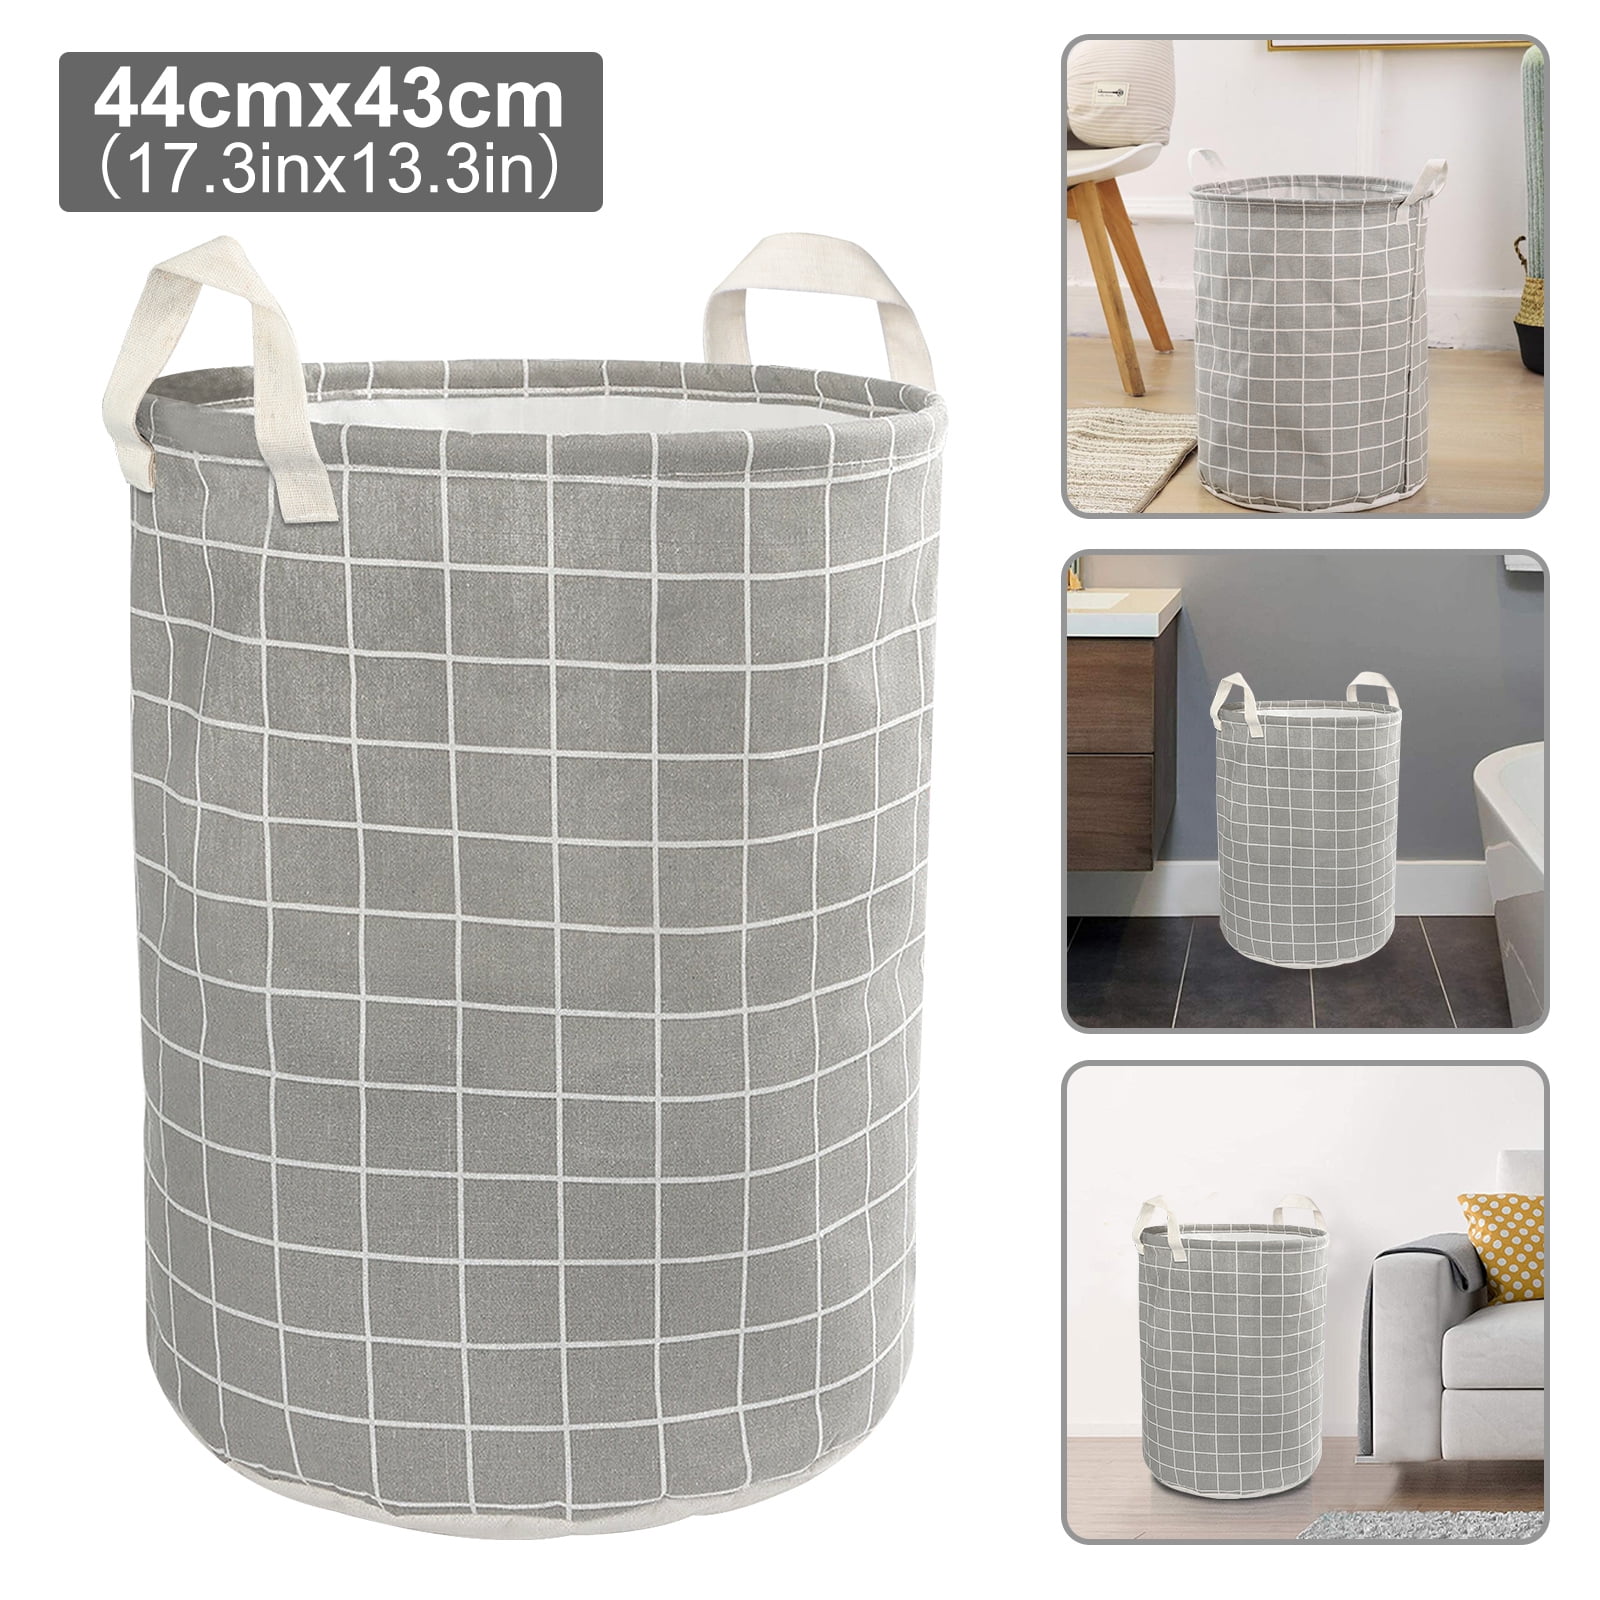 7 STYLES Laundry Hamper Clothes Foldable Basket Cotton Waterproof Storage 